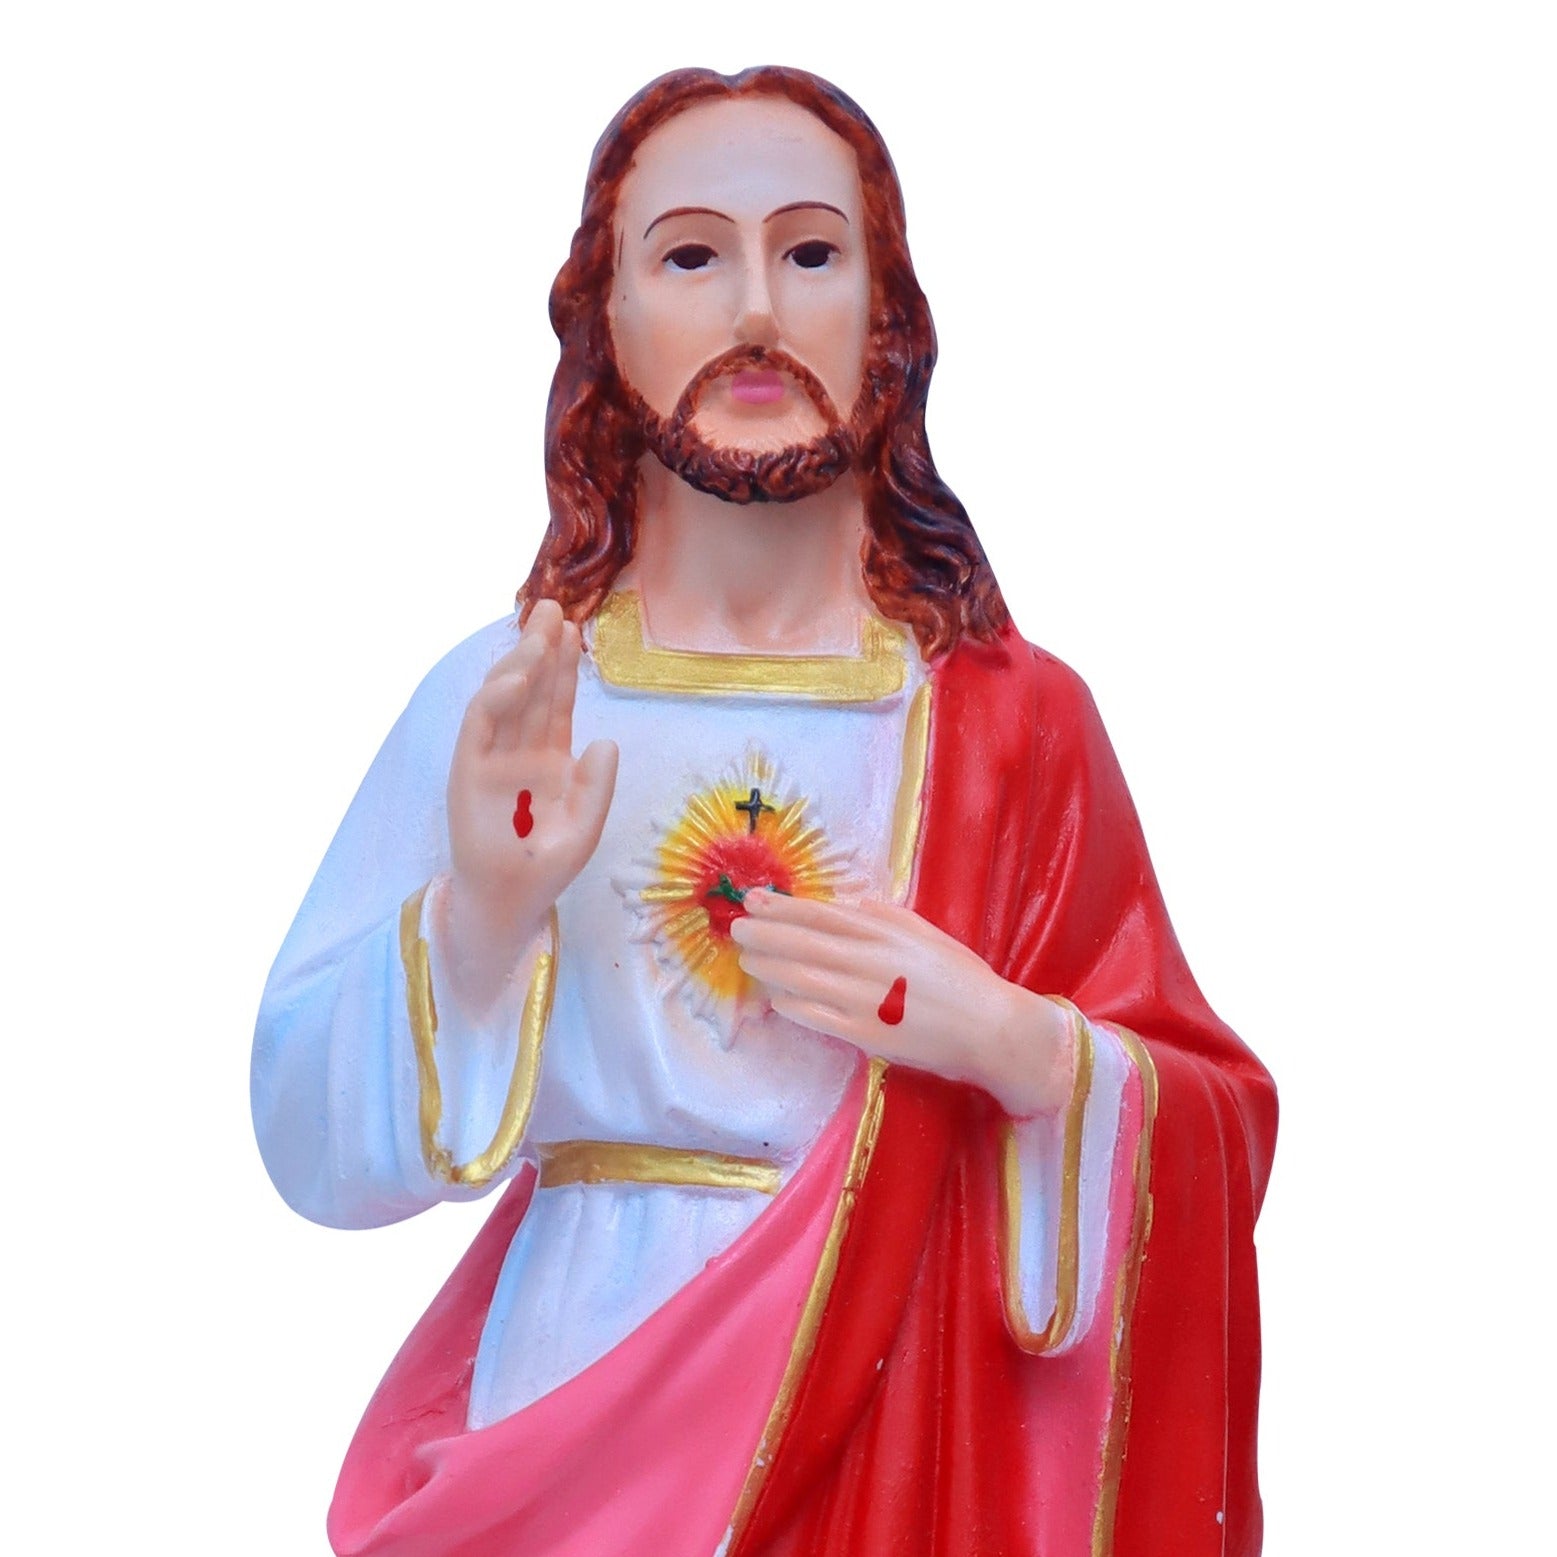 Sacred Heart 20 Inch Statue - Beautiful Religious Home Decor